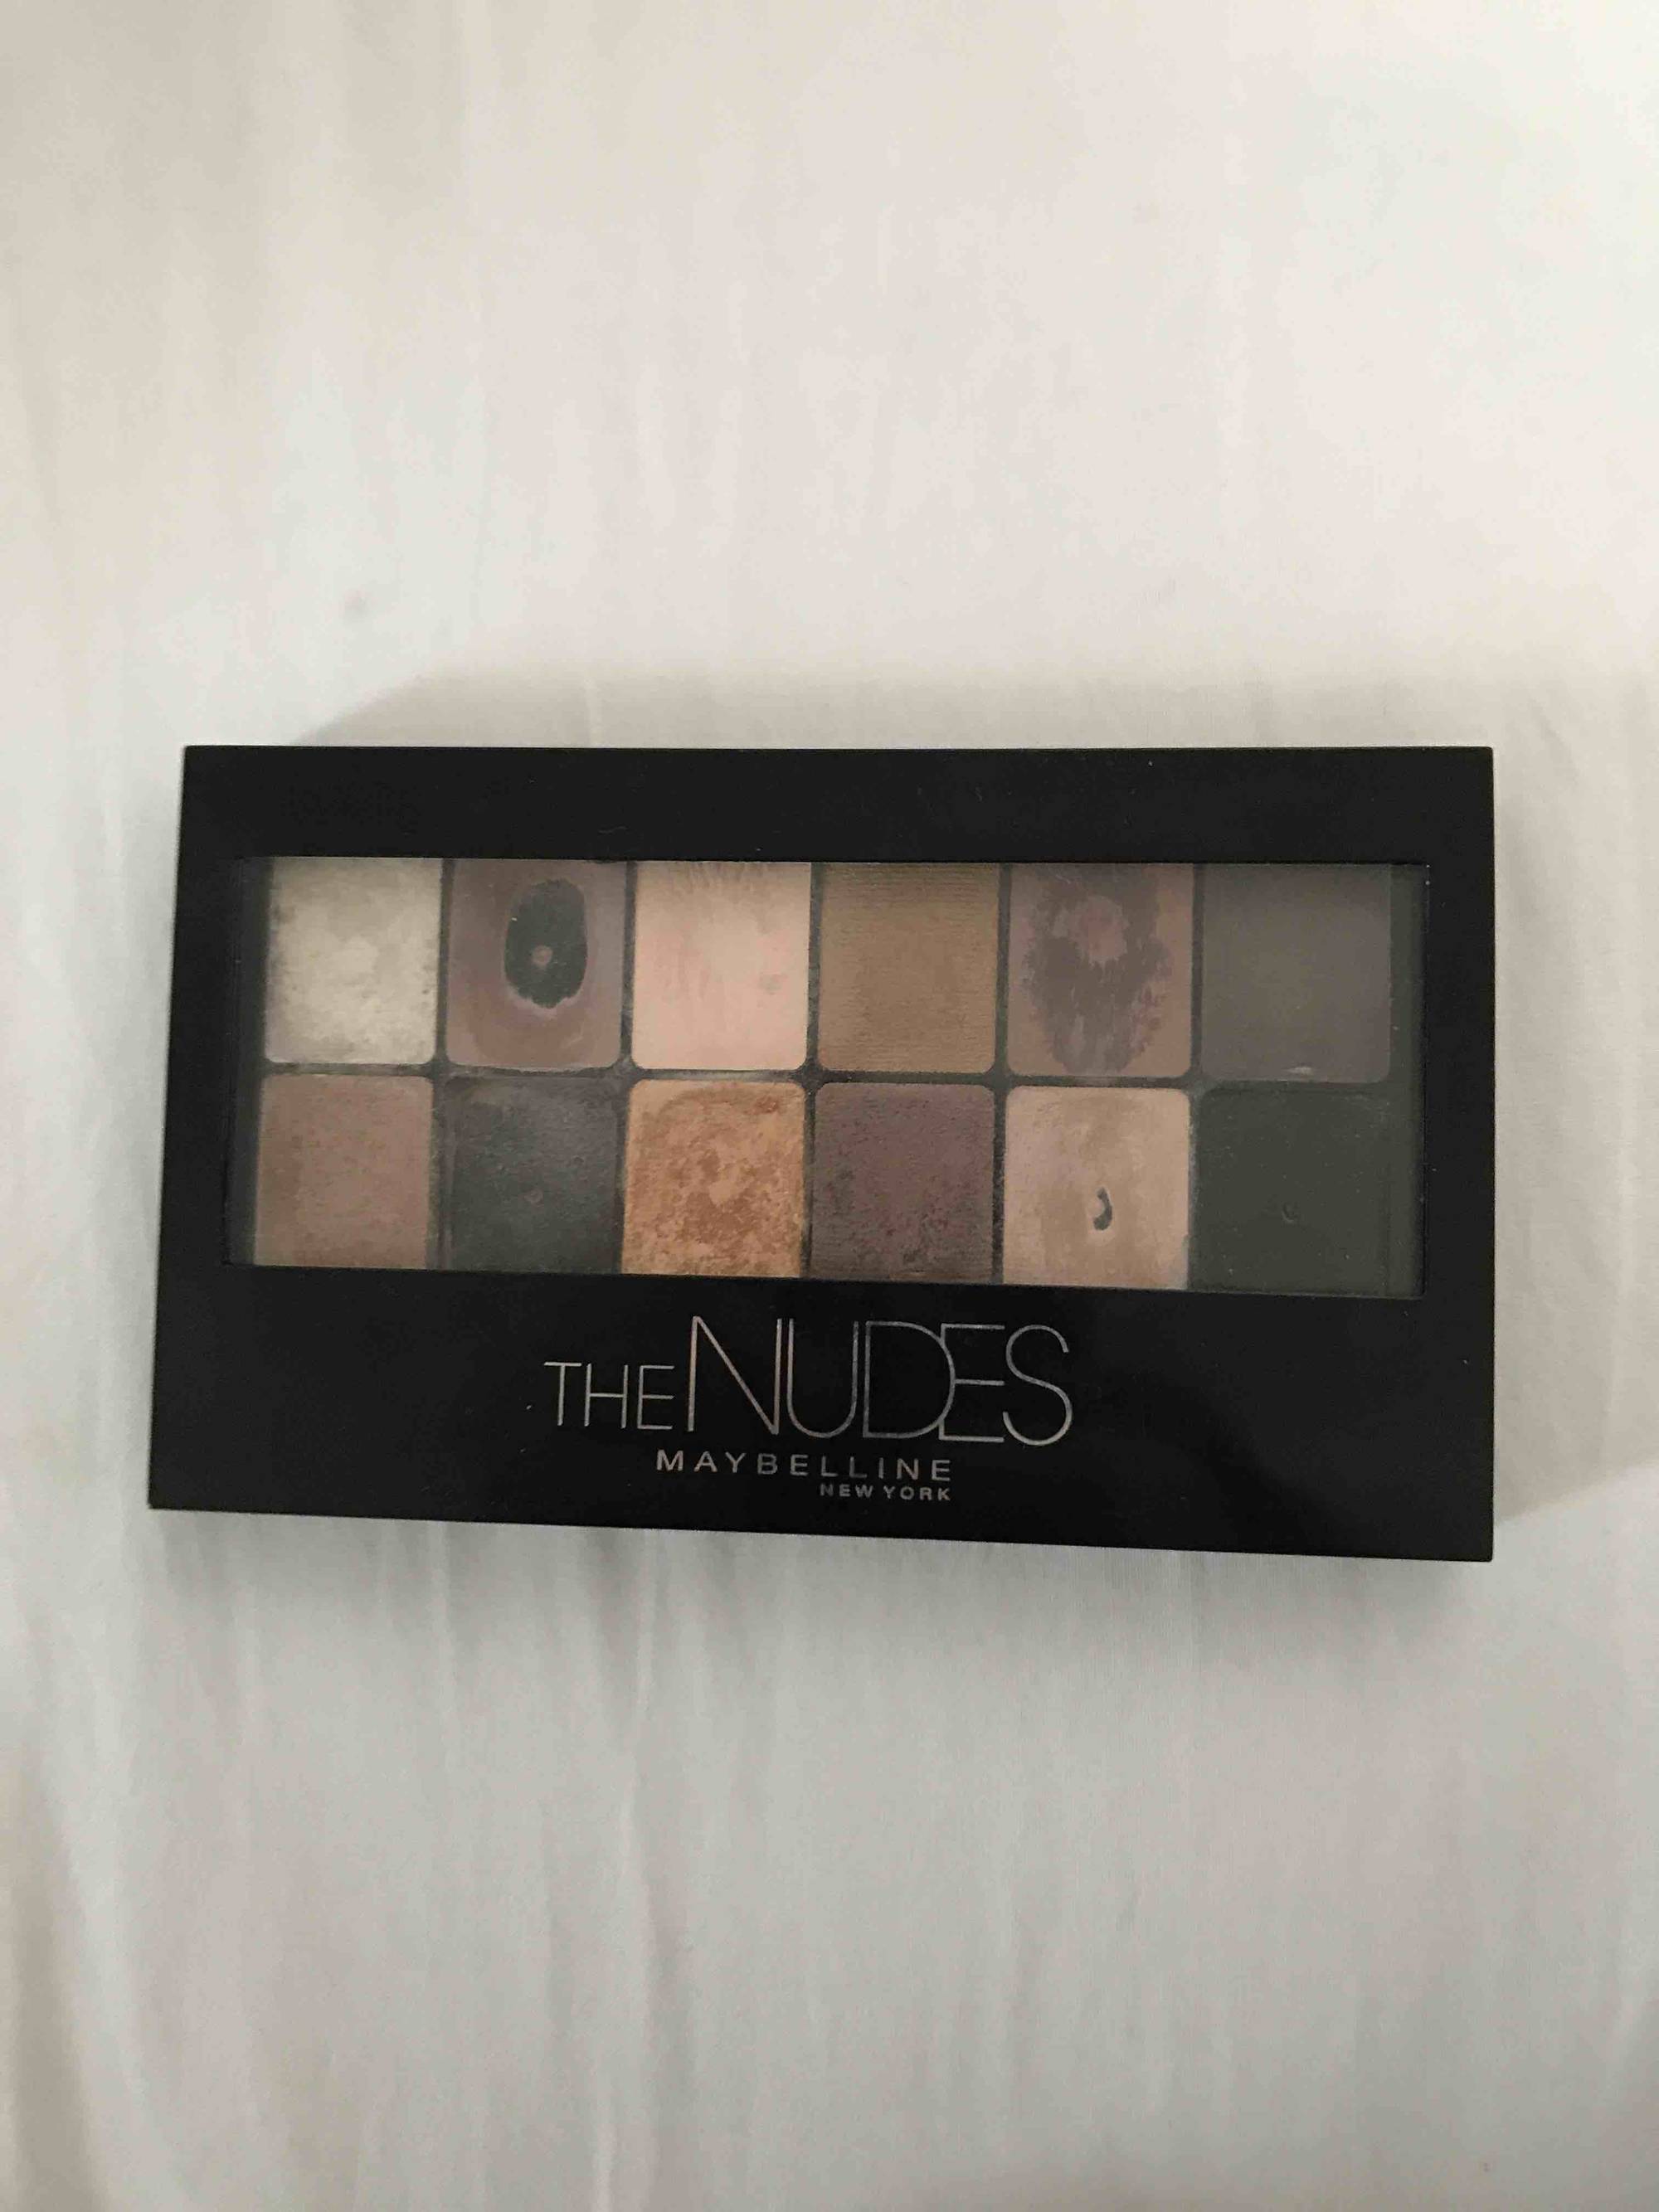 MAYBELLINE - The nudes